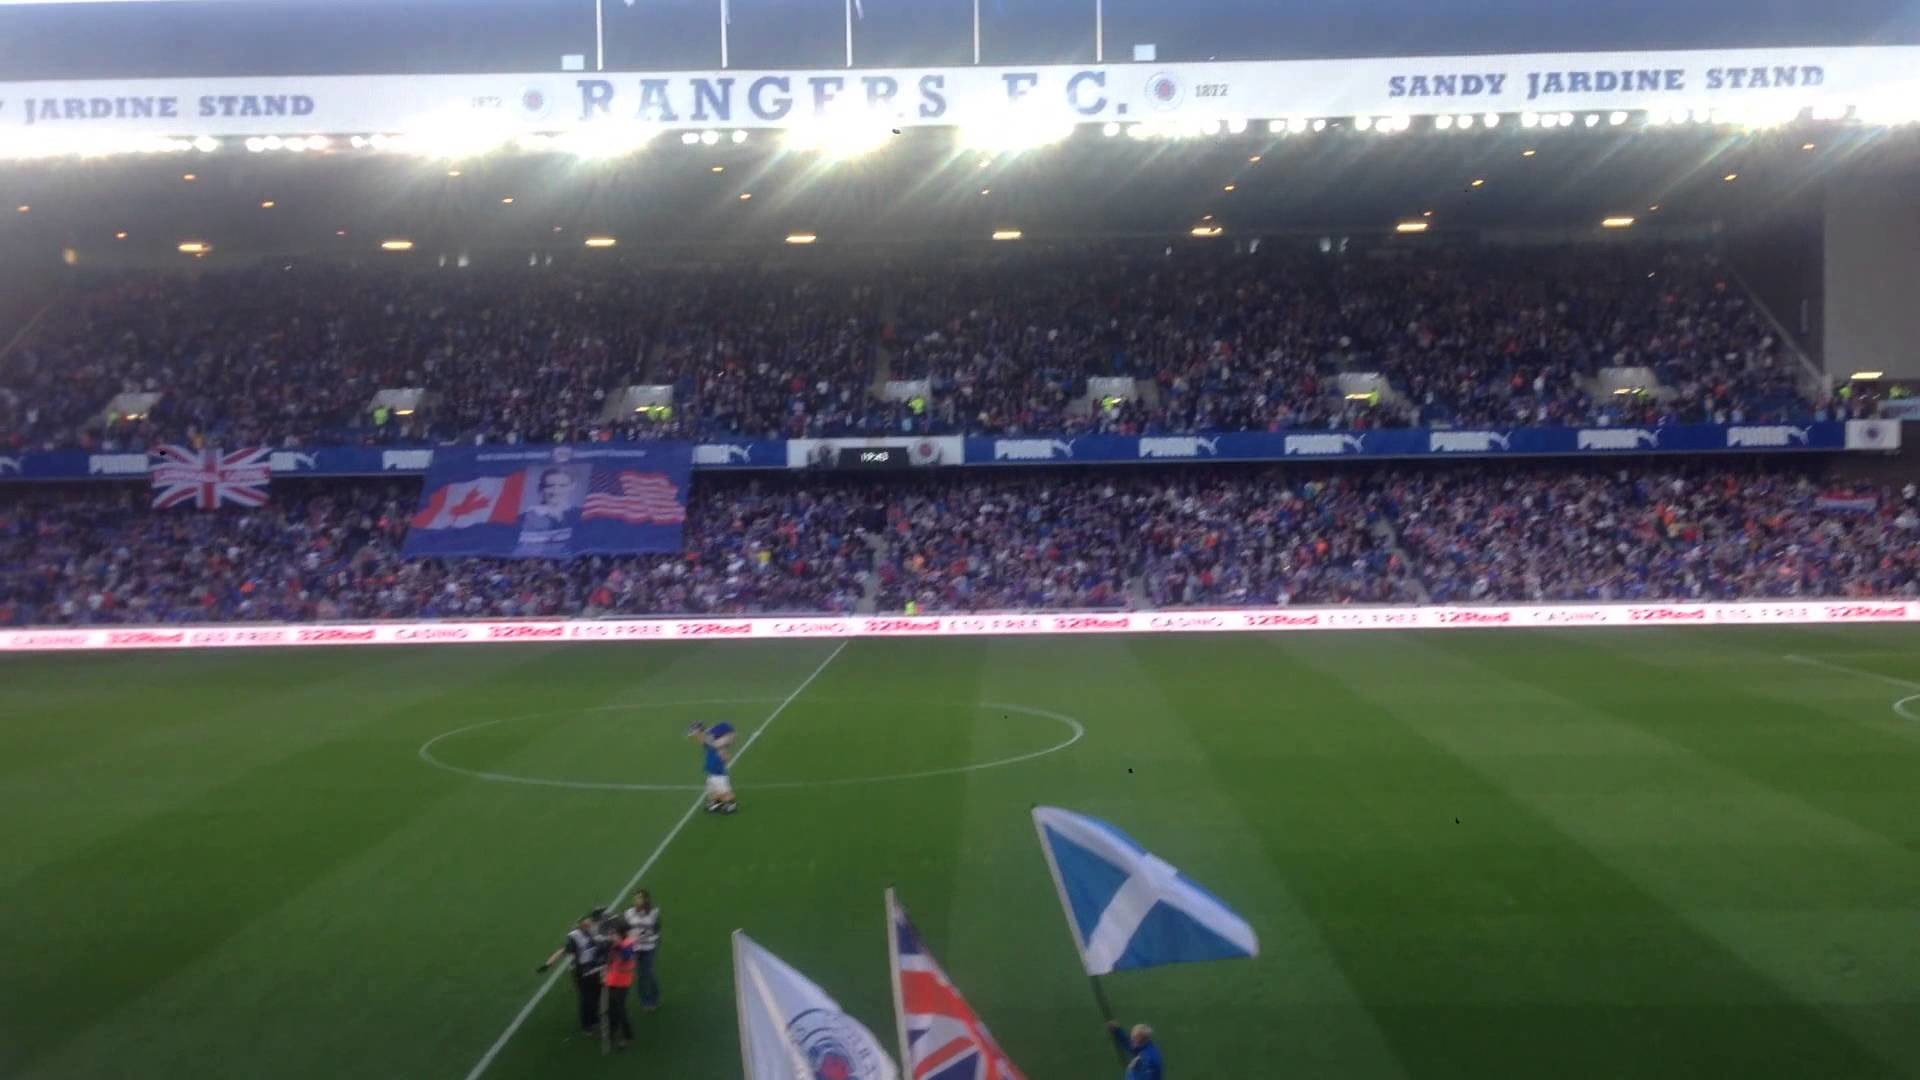 1920x1080 Blue sea of IBROX 51000 sell out Glasgow Rangers 3 St mirren 1